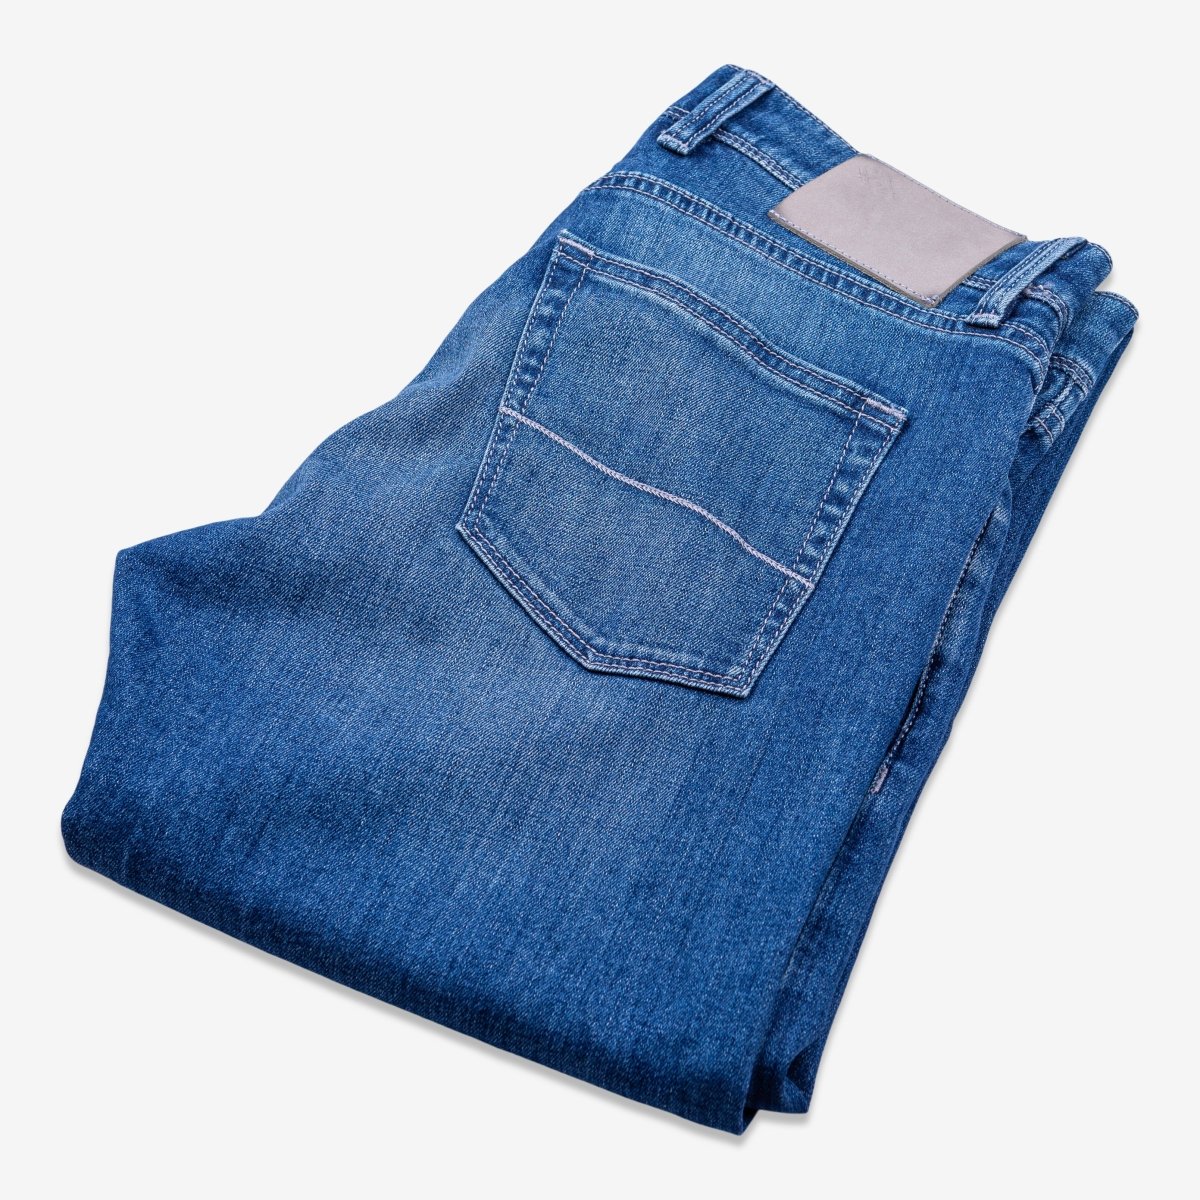 NEW TAILOR - Spijkerbroek, Middenblauw Washed (Candiani), Jeans | NEW TAILOR Webshop